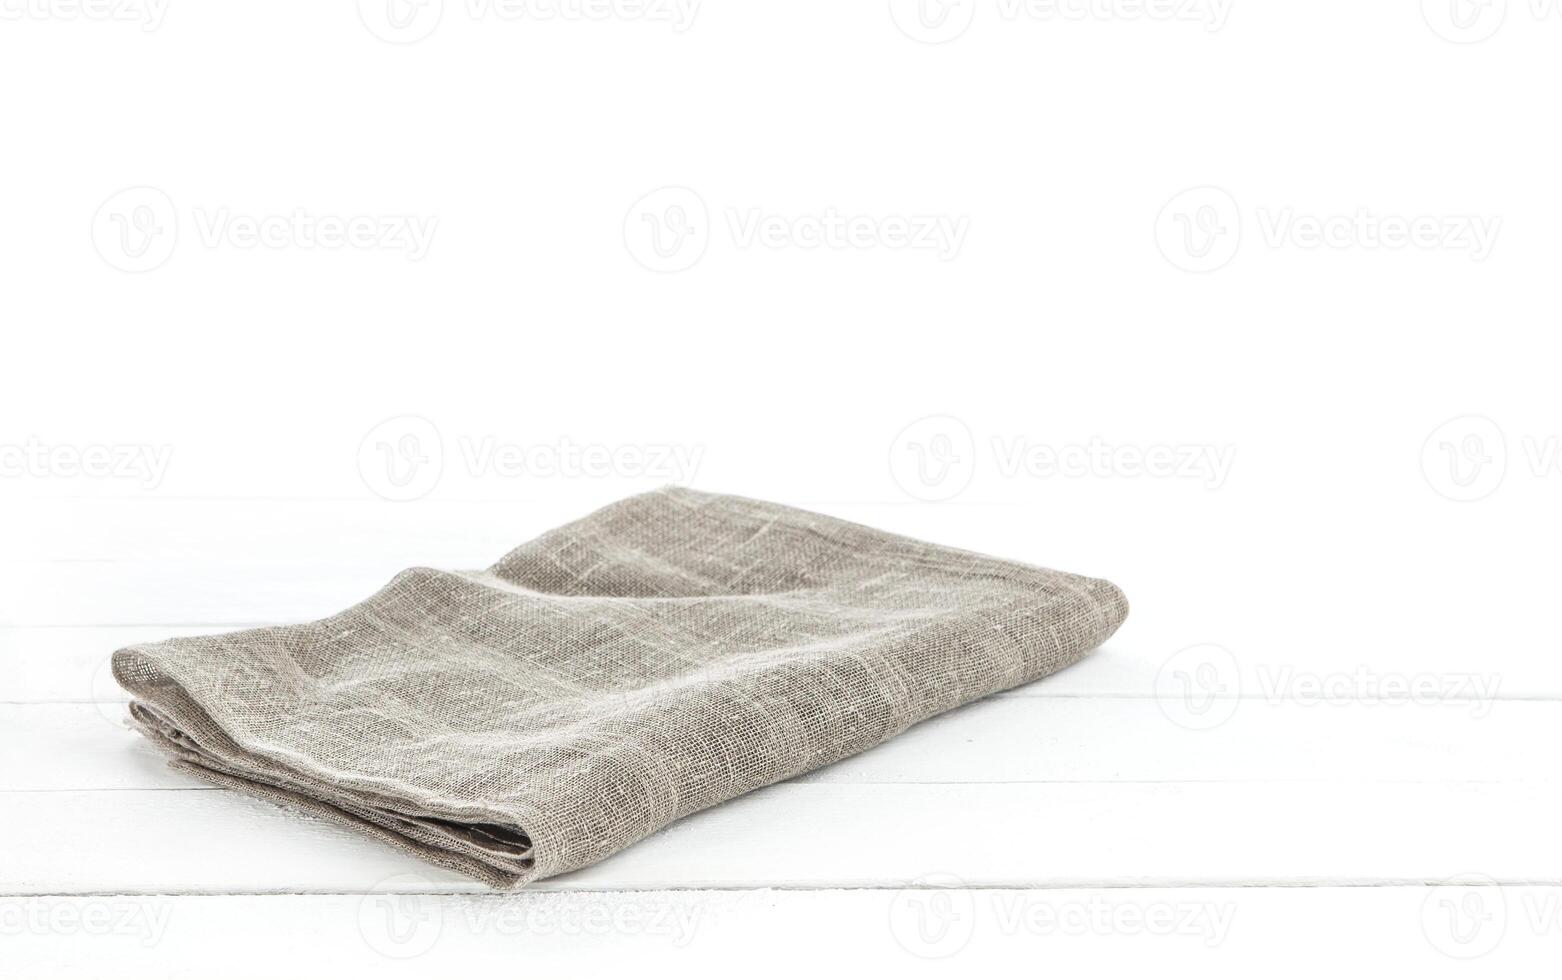 Folded Burlap hessian or sacking tablecloth on white wooden background for product montage photo